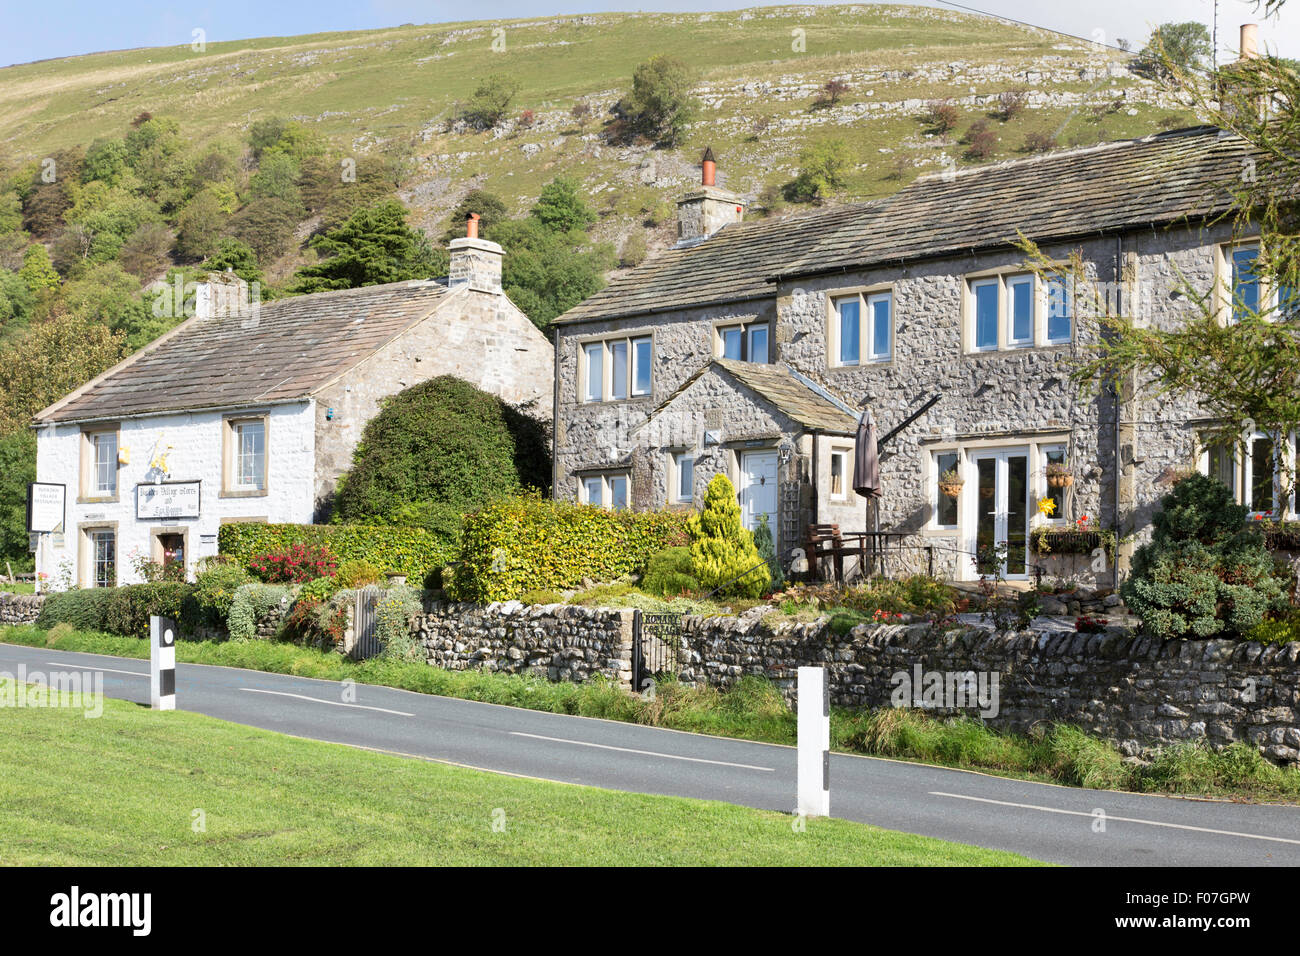 Cottages and the village store, Buckden, Wharfdale, Yorkshire Dales National Park, North Yorkshire, England, UK Stock Photo